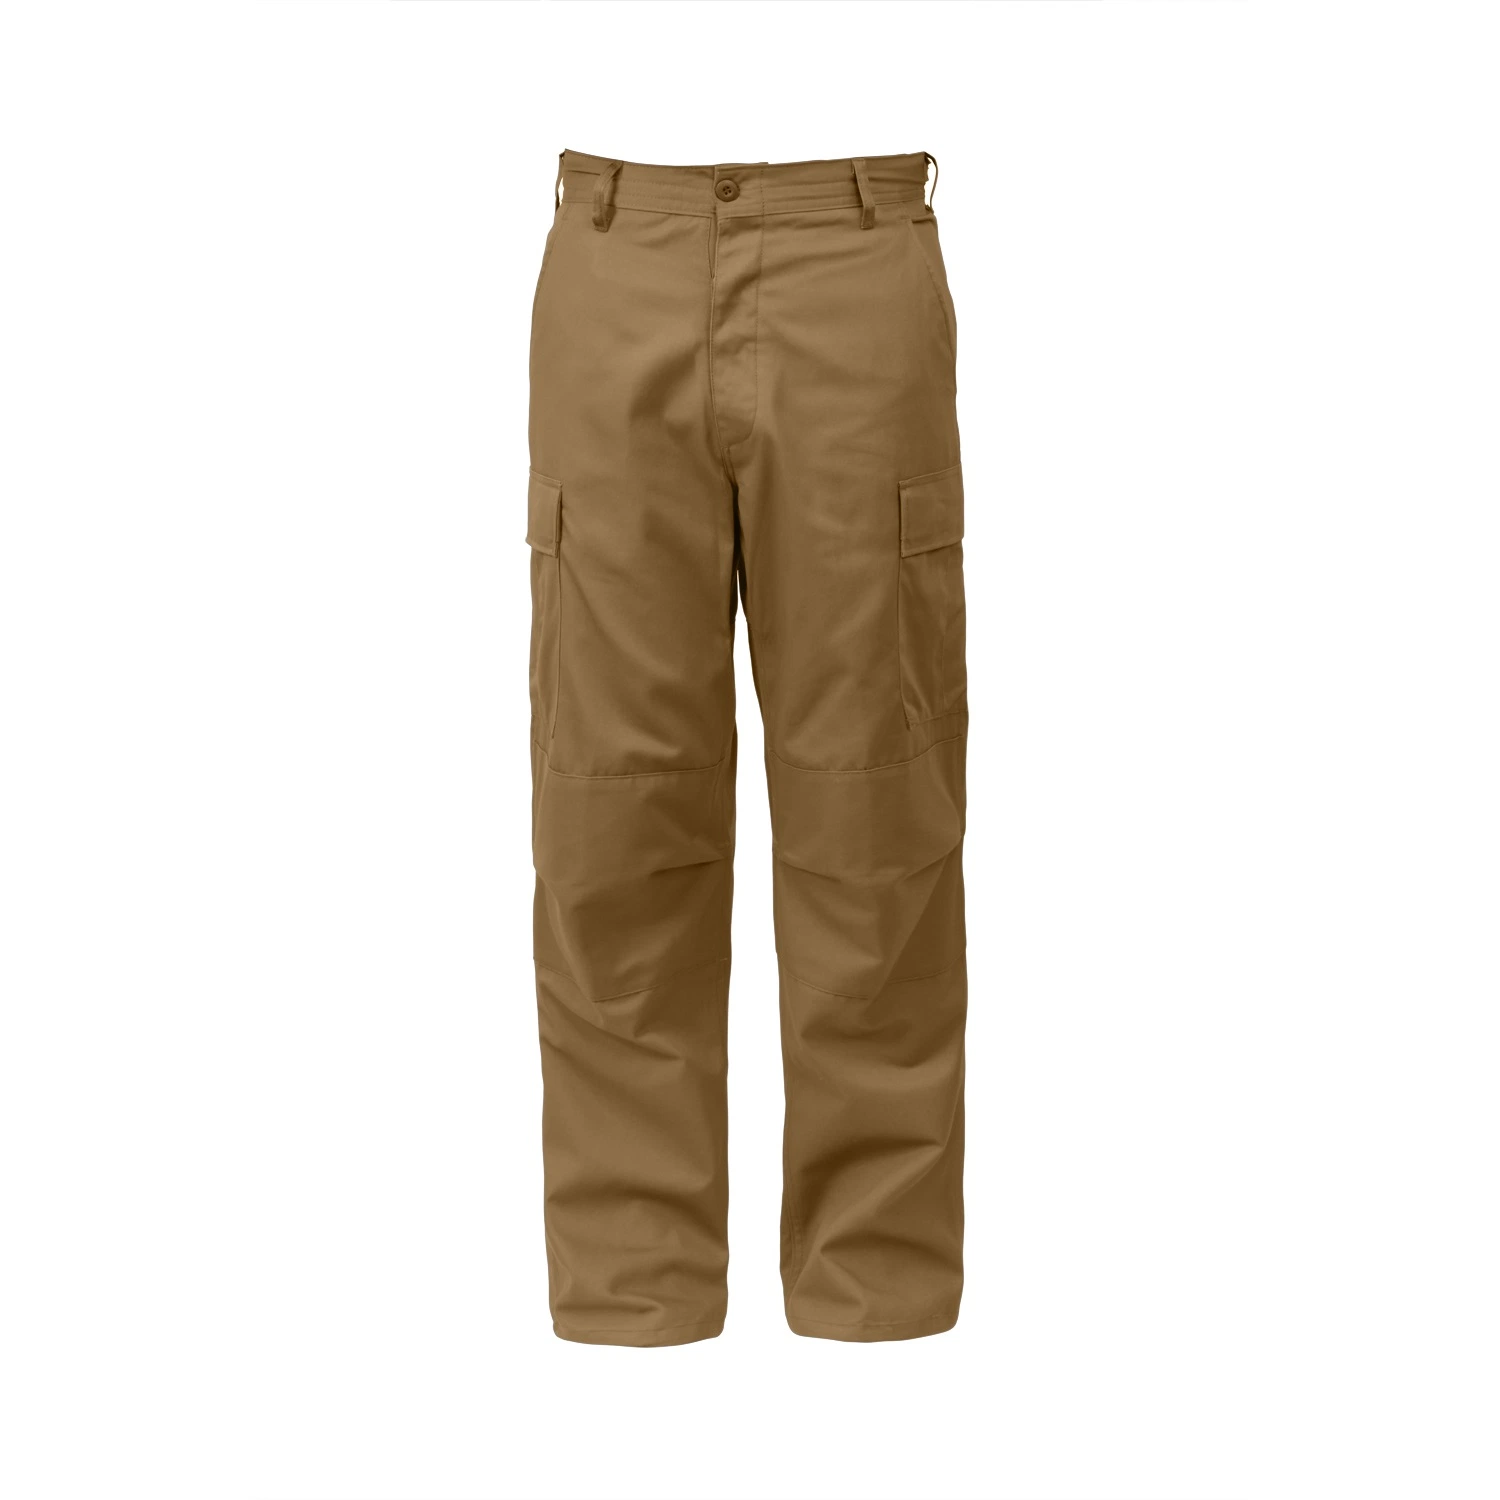 High Quality Men's Cargo Pants Tactical Outdoor Casual Long Trousers